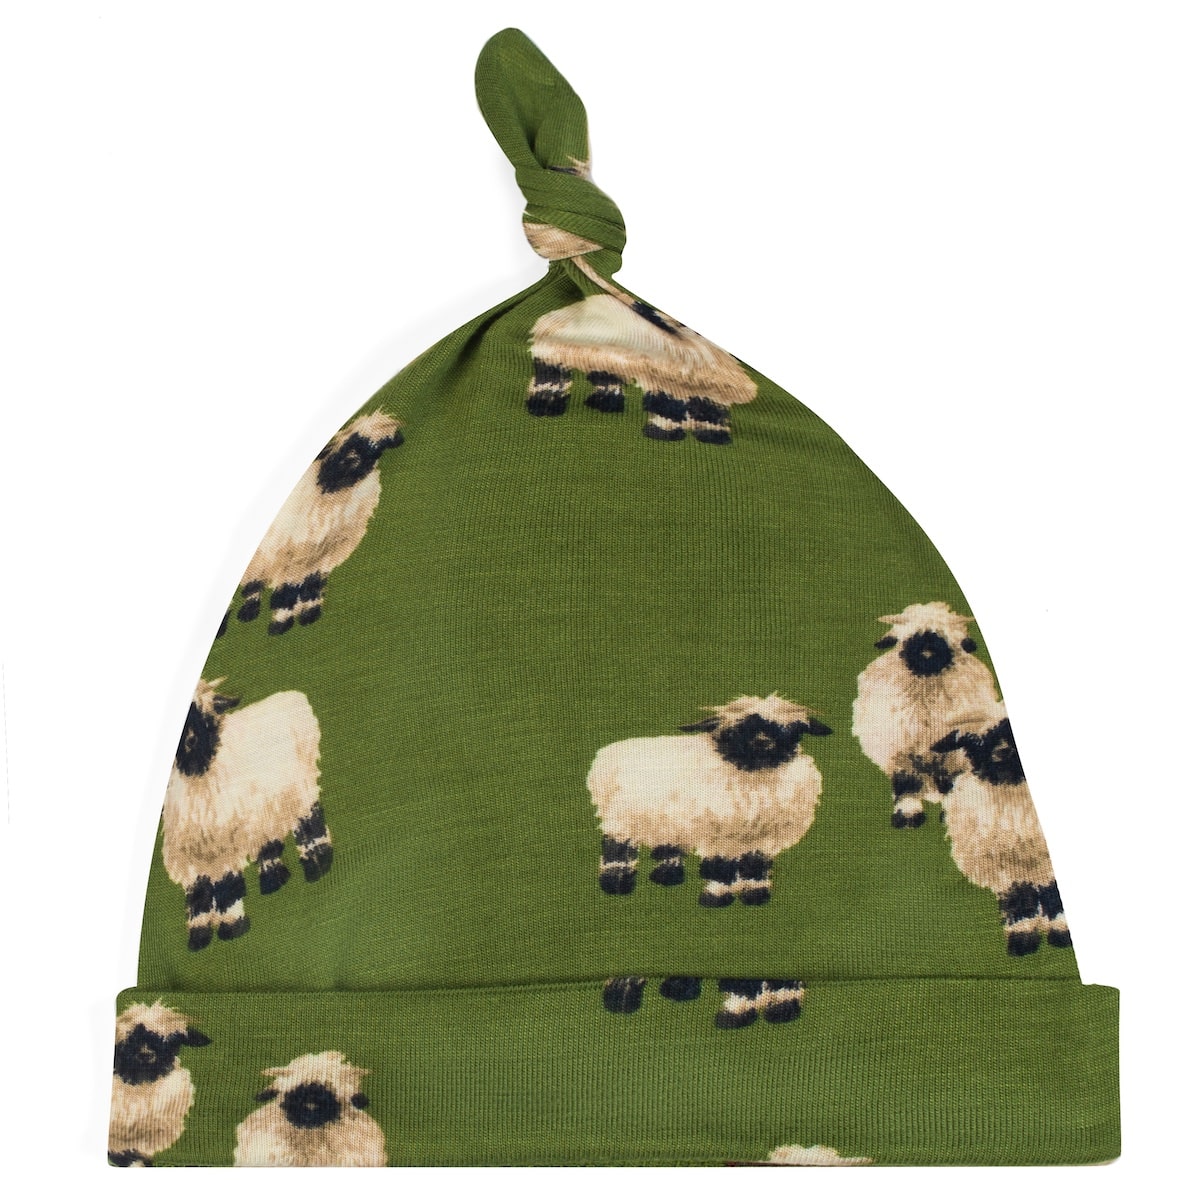 Valais Sheep Bamboo Knotted Beanie Hat by Milkbarn